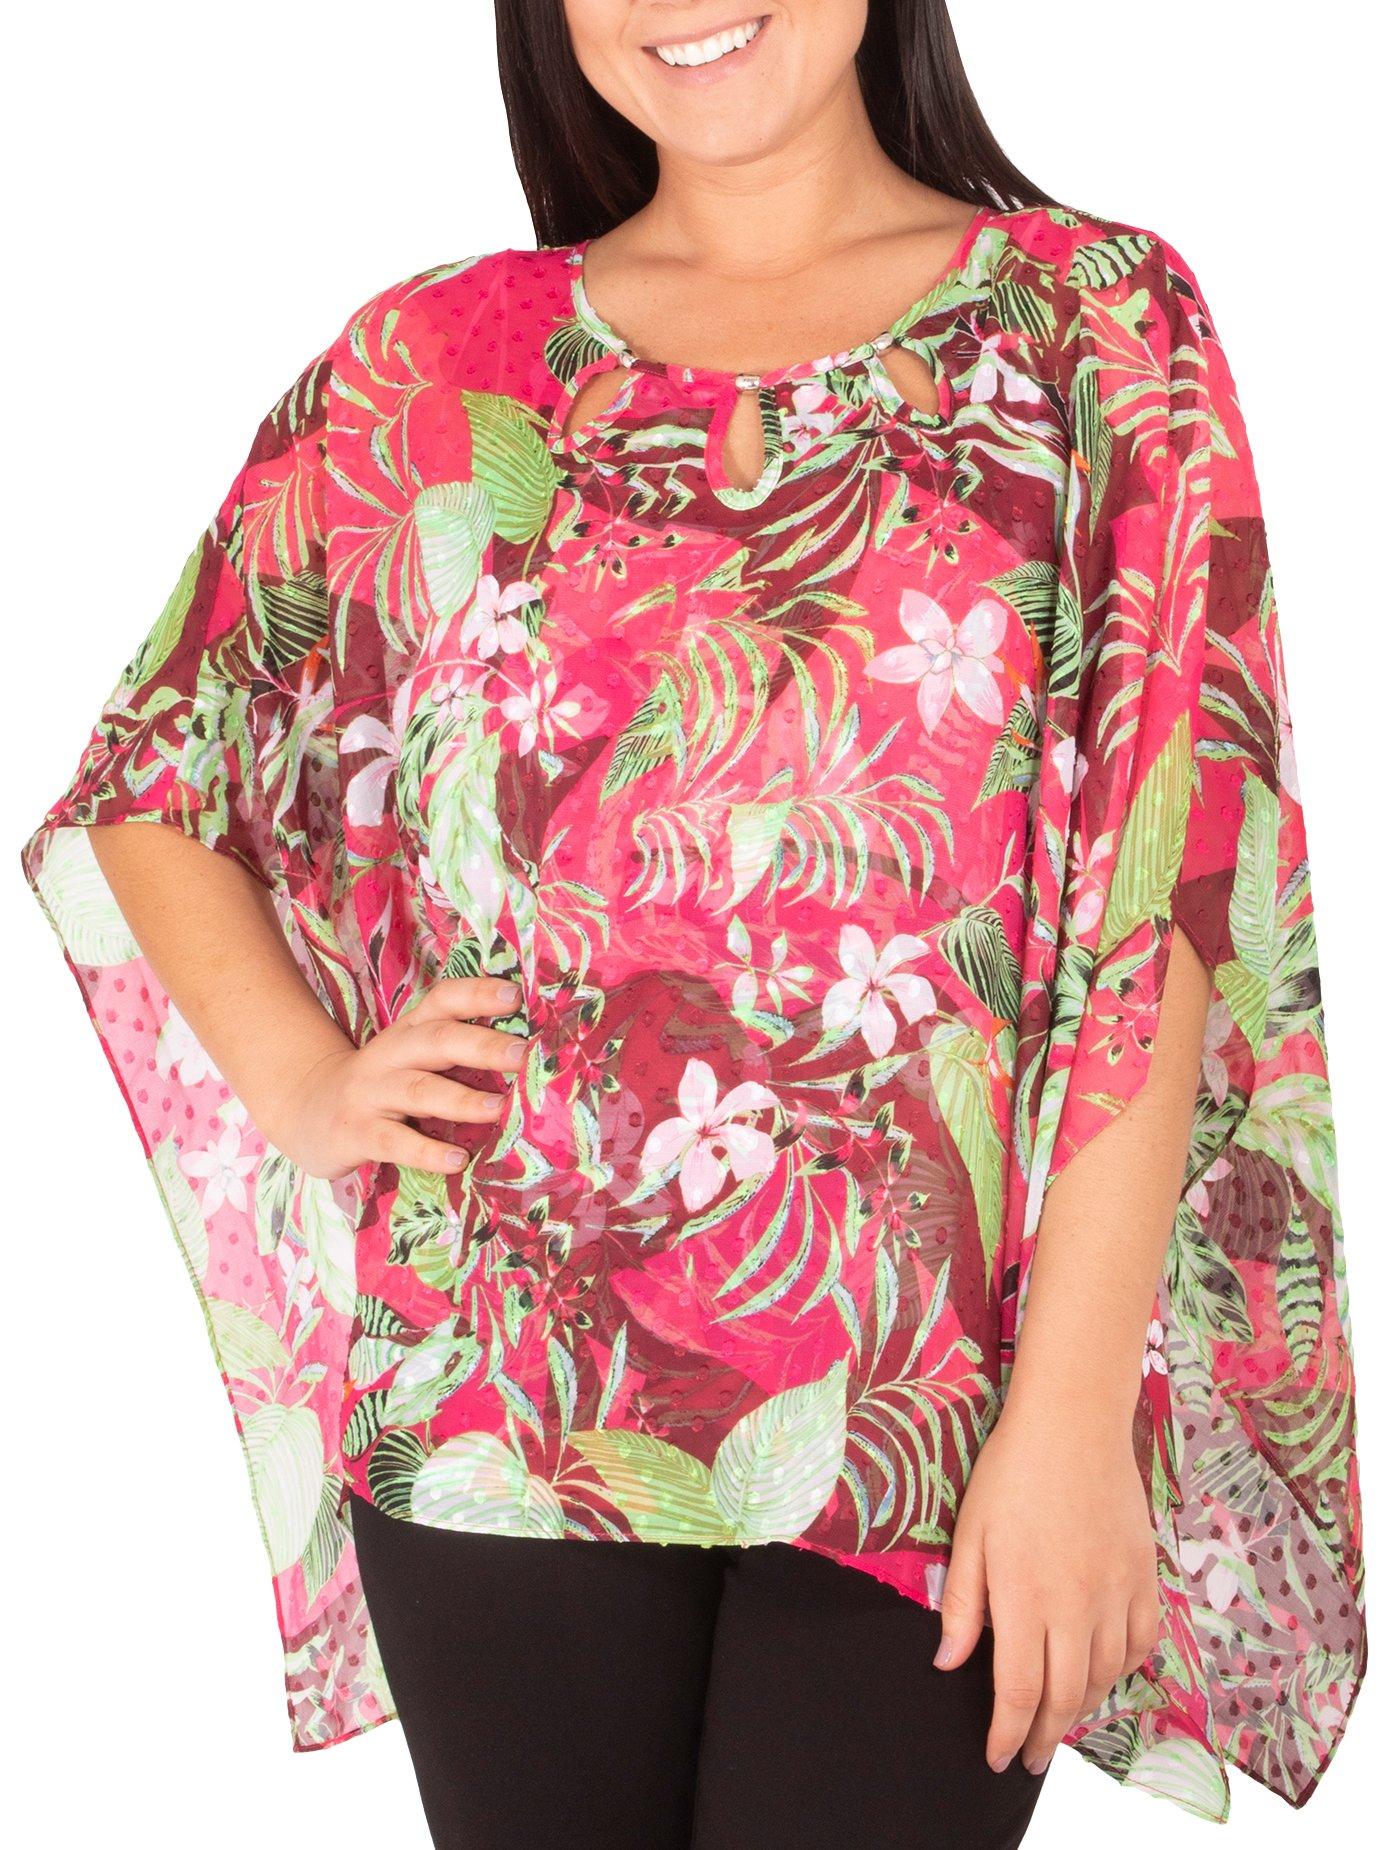 NY Collection Womens Floral Chiffon Poncho